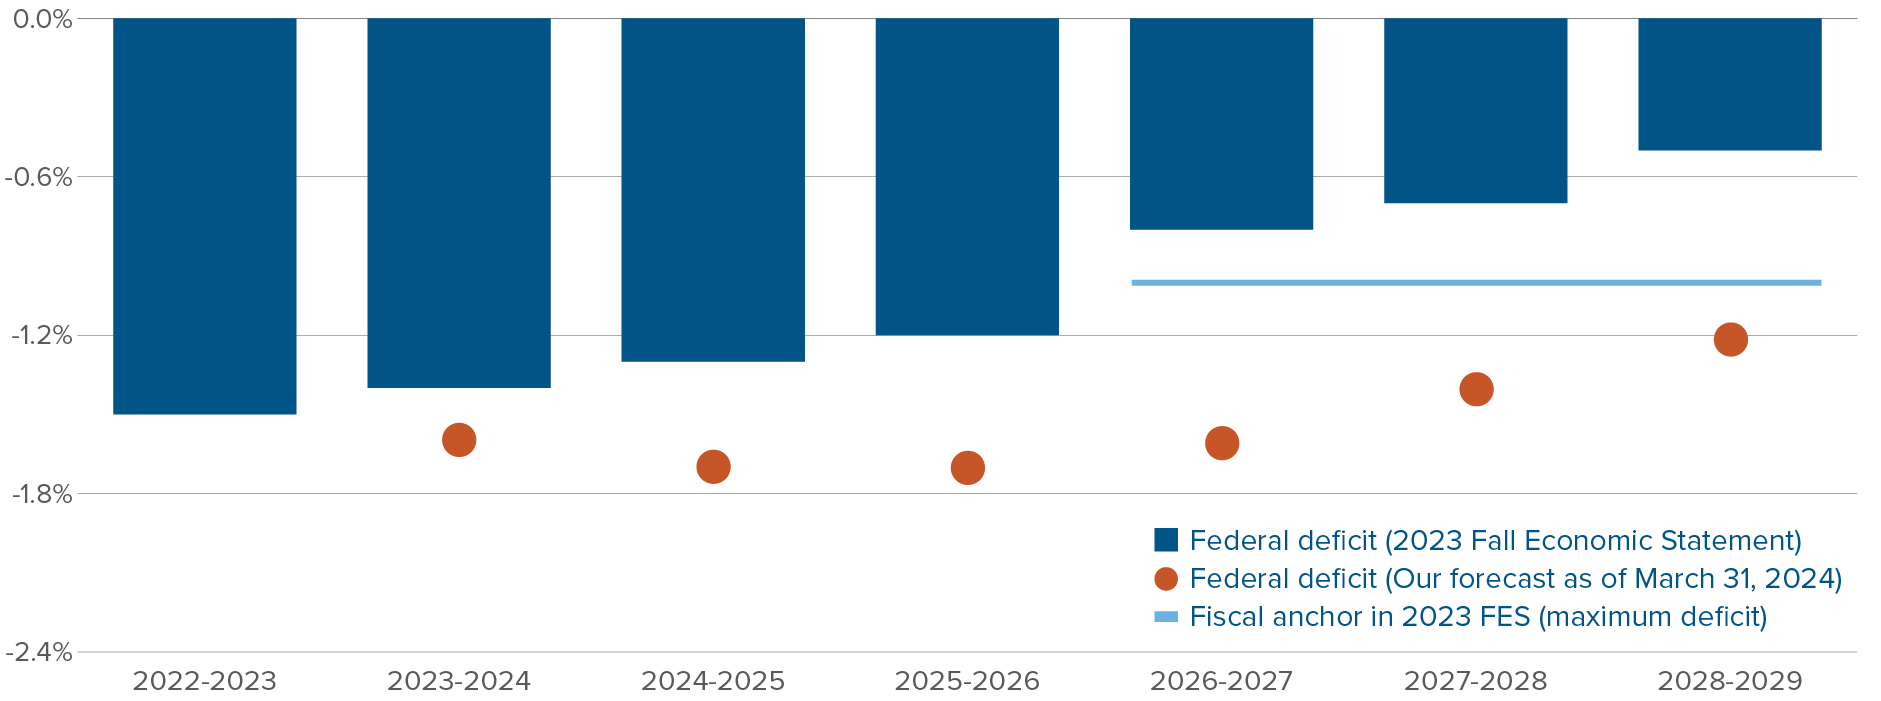 Chart: Federal deficit as a percentage of GDP—we forecast deficits will remain at or above 1.5% of GDP until 2027-28, and still be 1.2% of GDP by 2028-29.